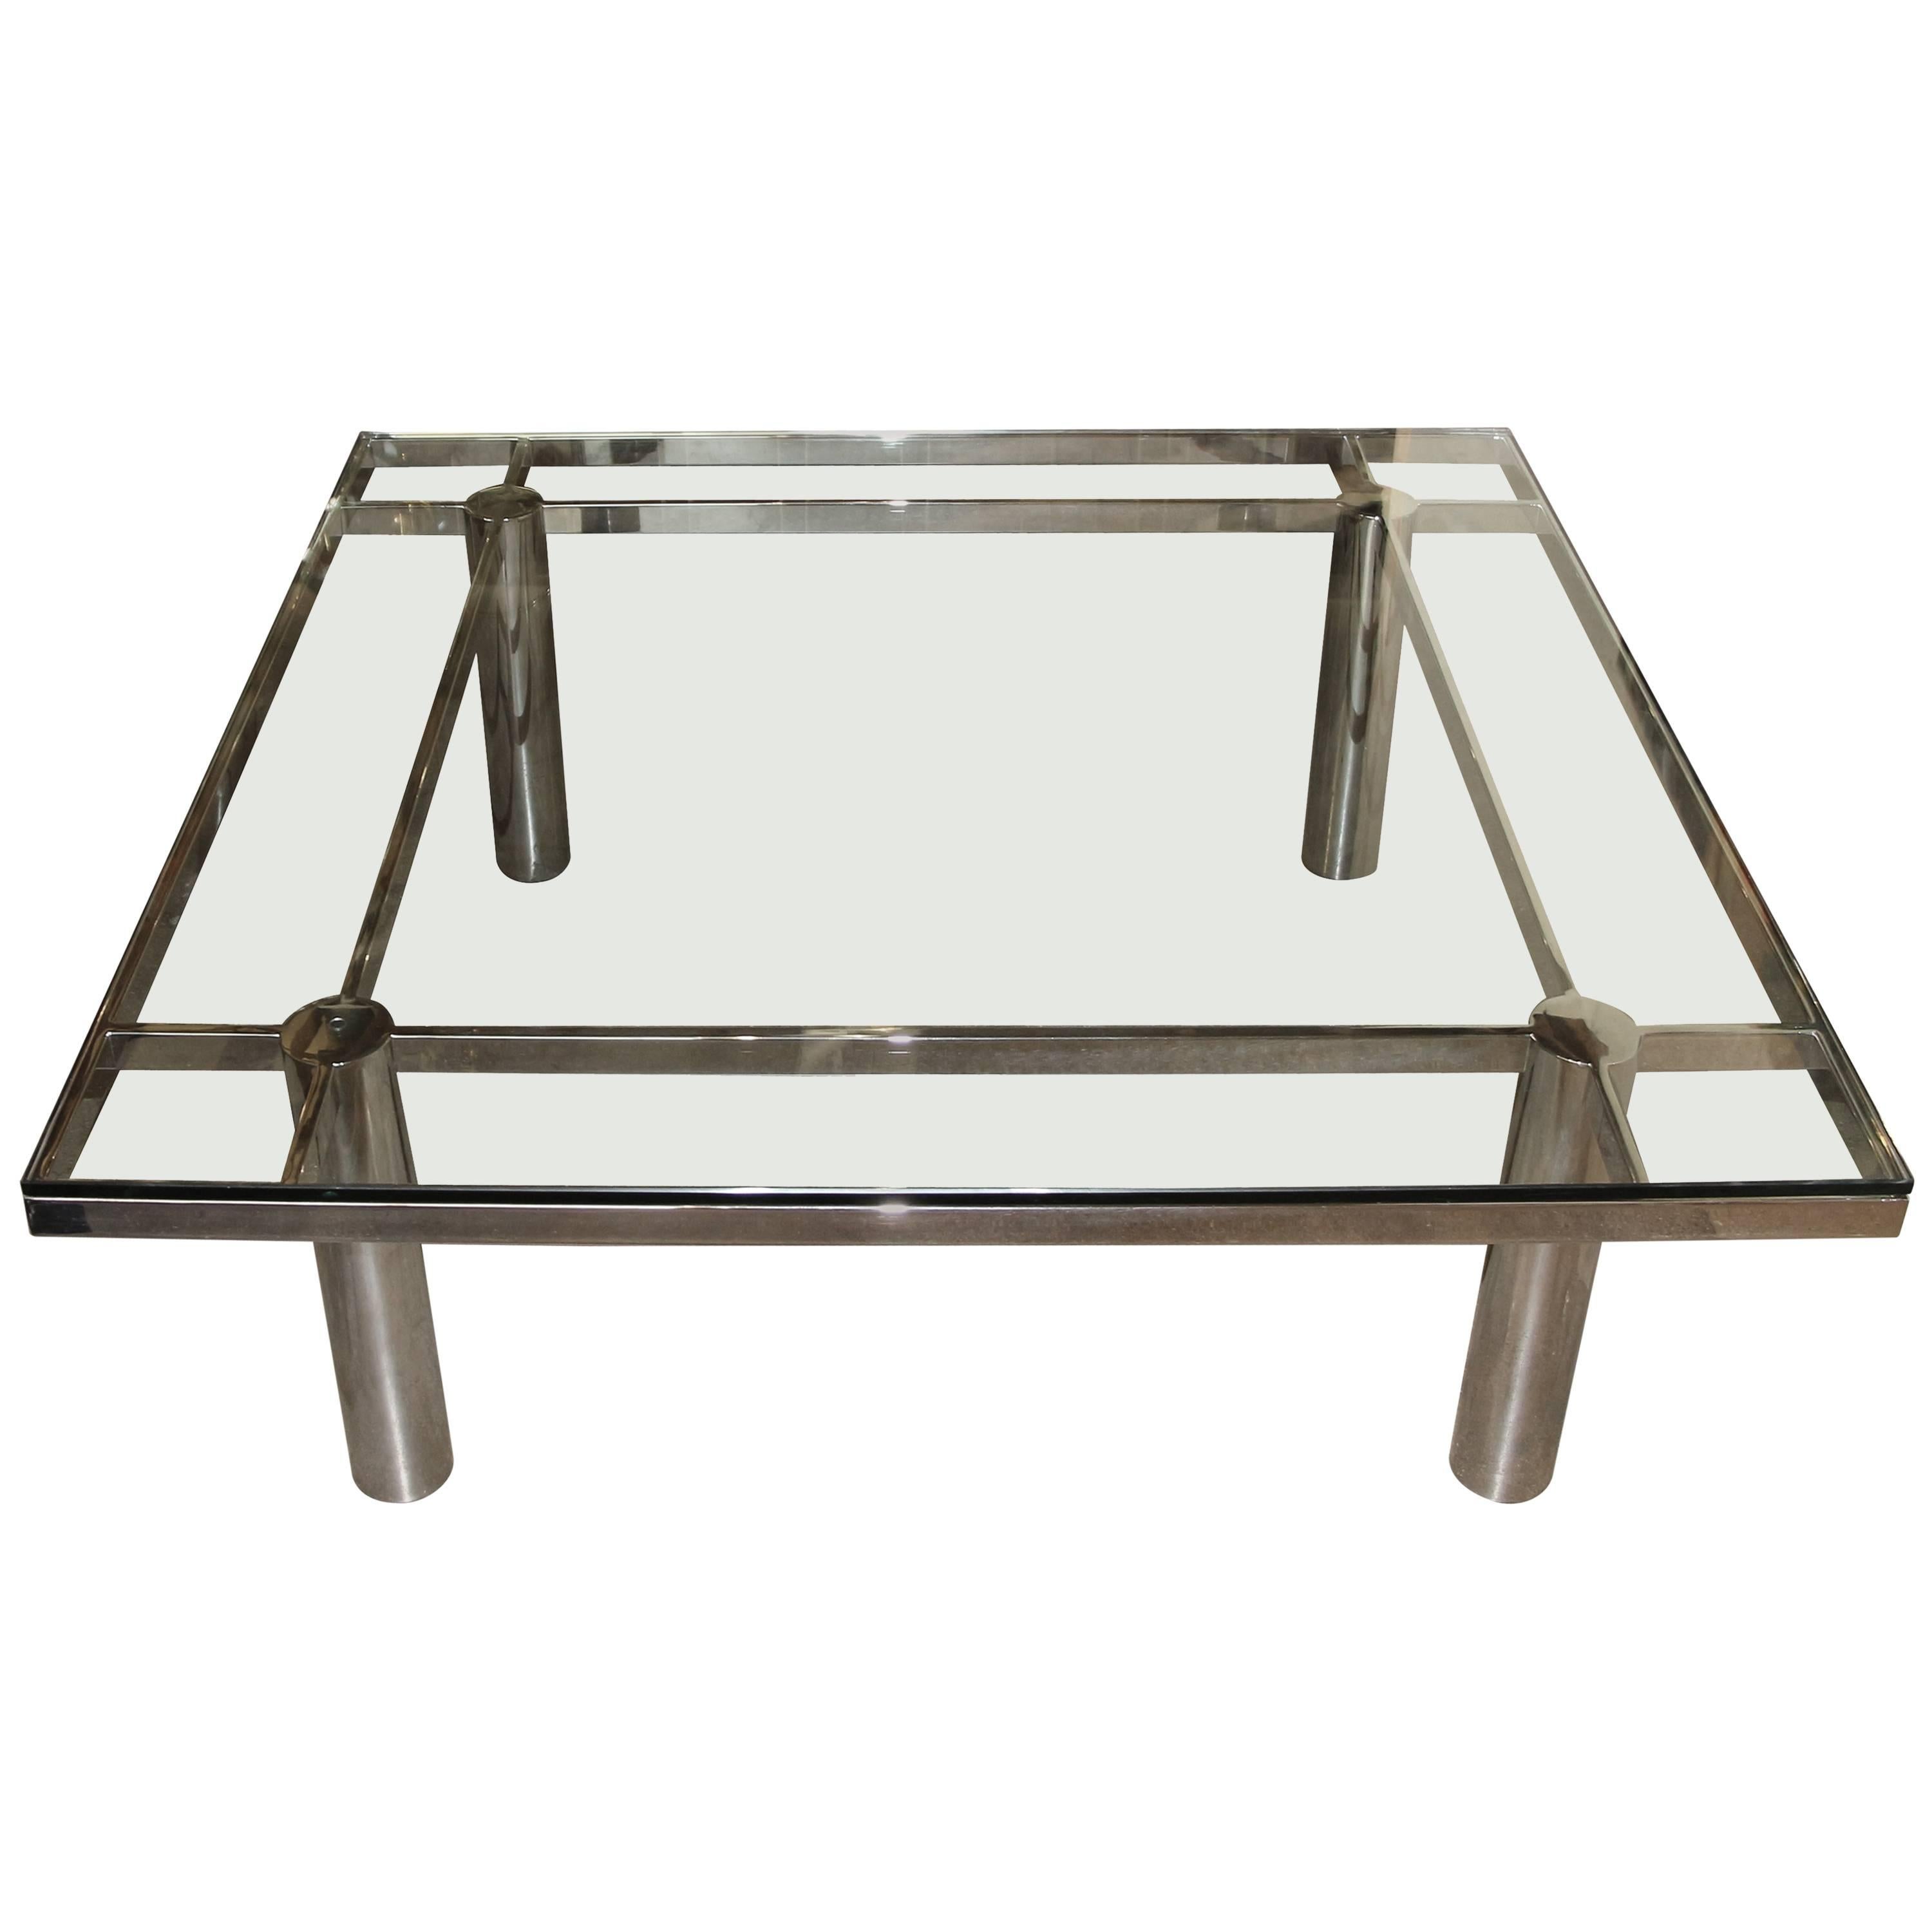 Afra and Tobia Scarpa "Andre" Coffee Table for Knoll